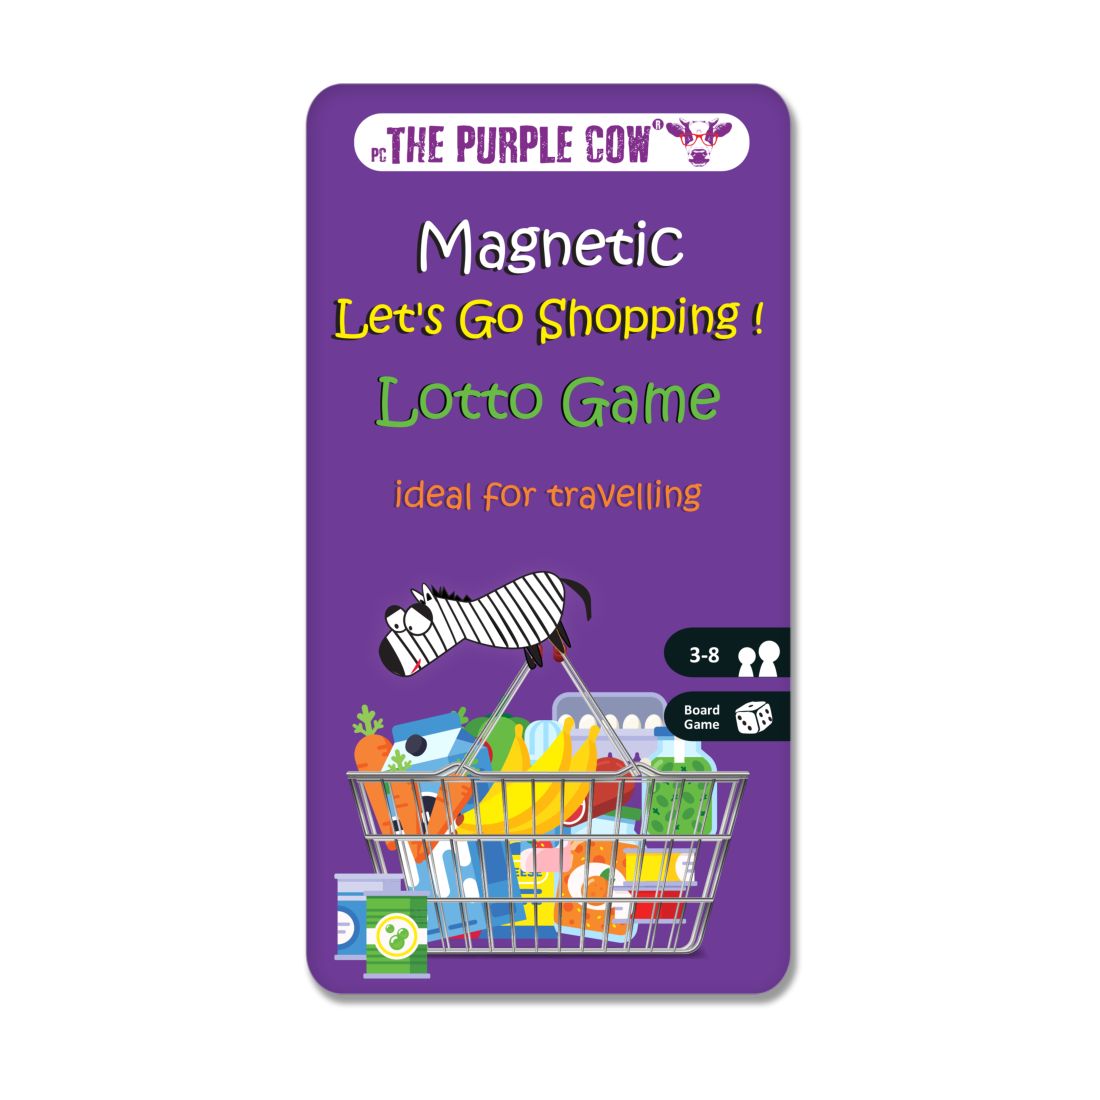 The Purple Cow To Go Magnetic Lets Go Shopping Travel Game